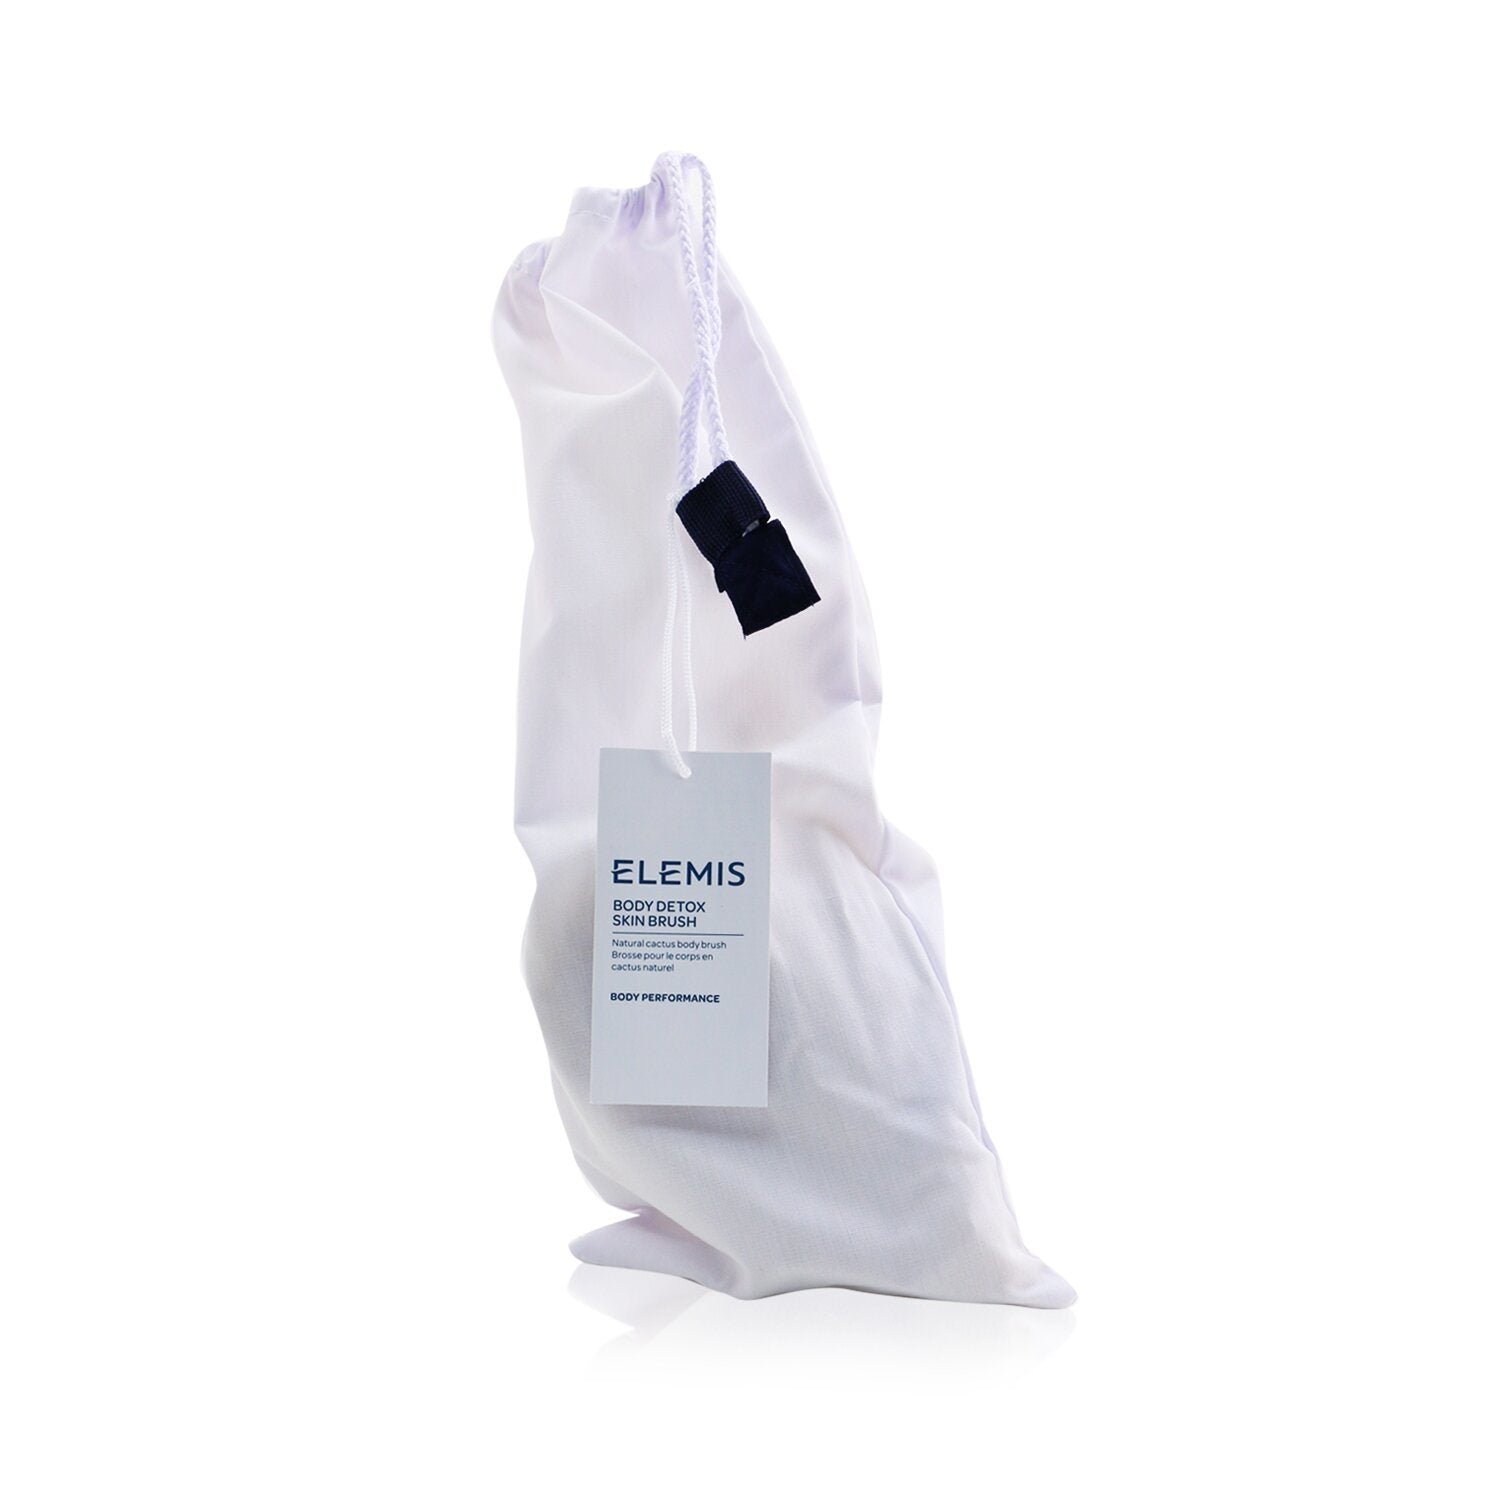 A Body Detox Skin Brush with a plastic bag next to it, ideal for improving skin texture and reducing cellulite.